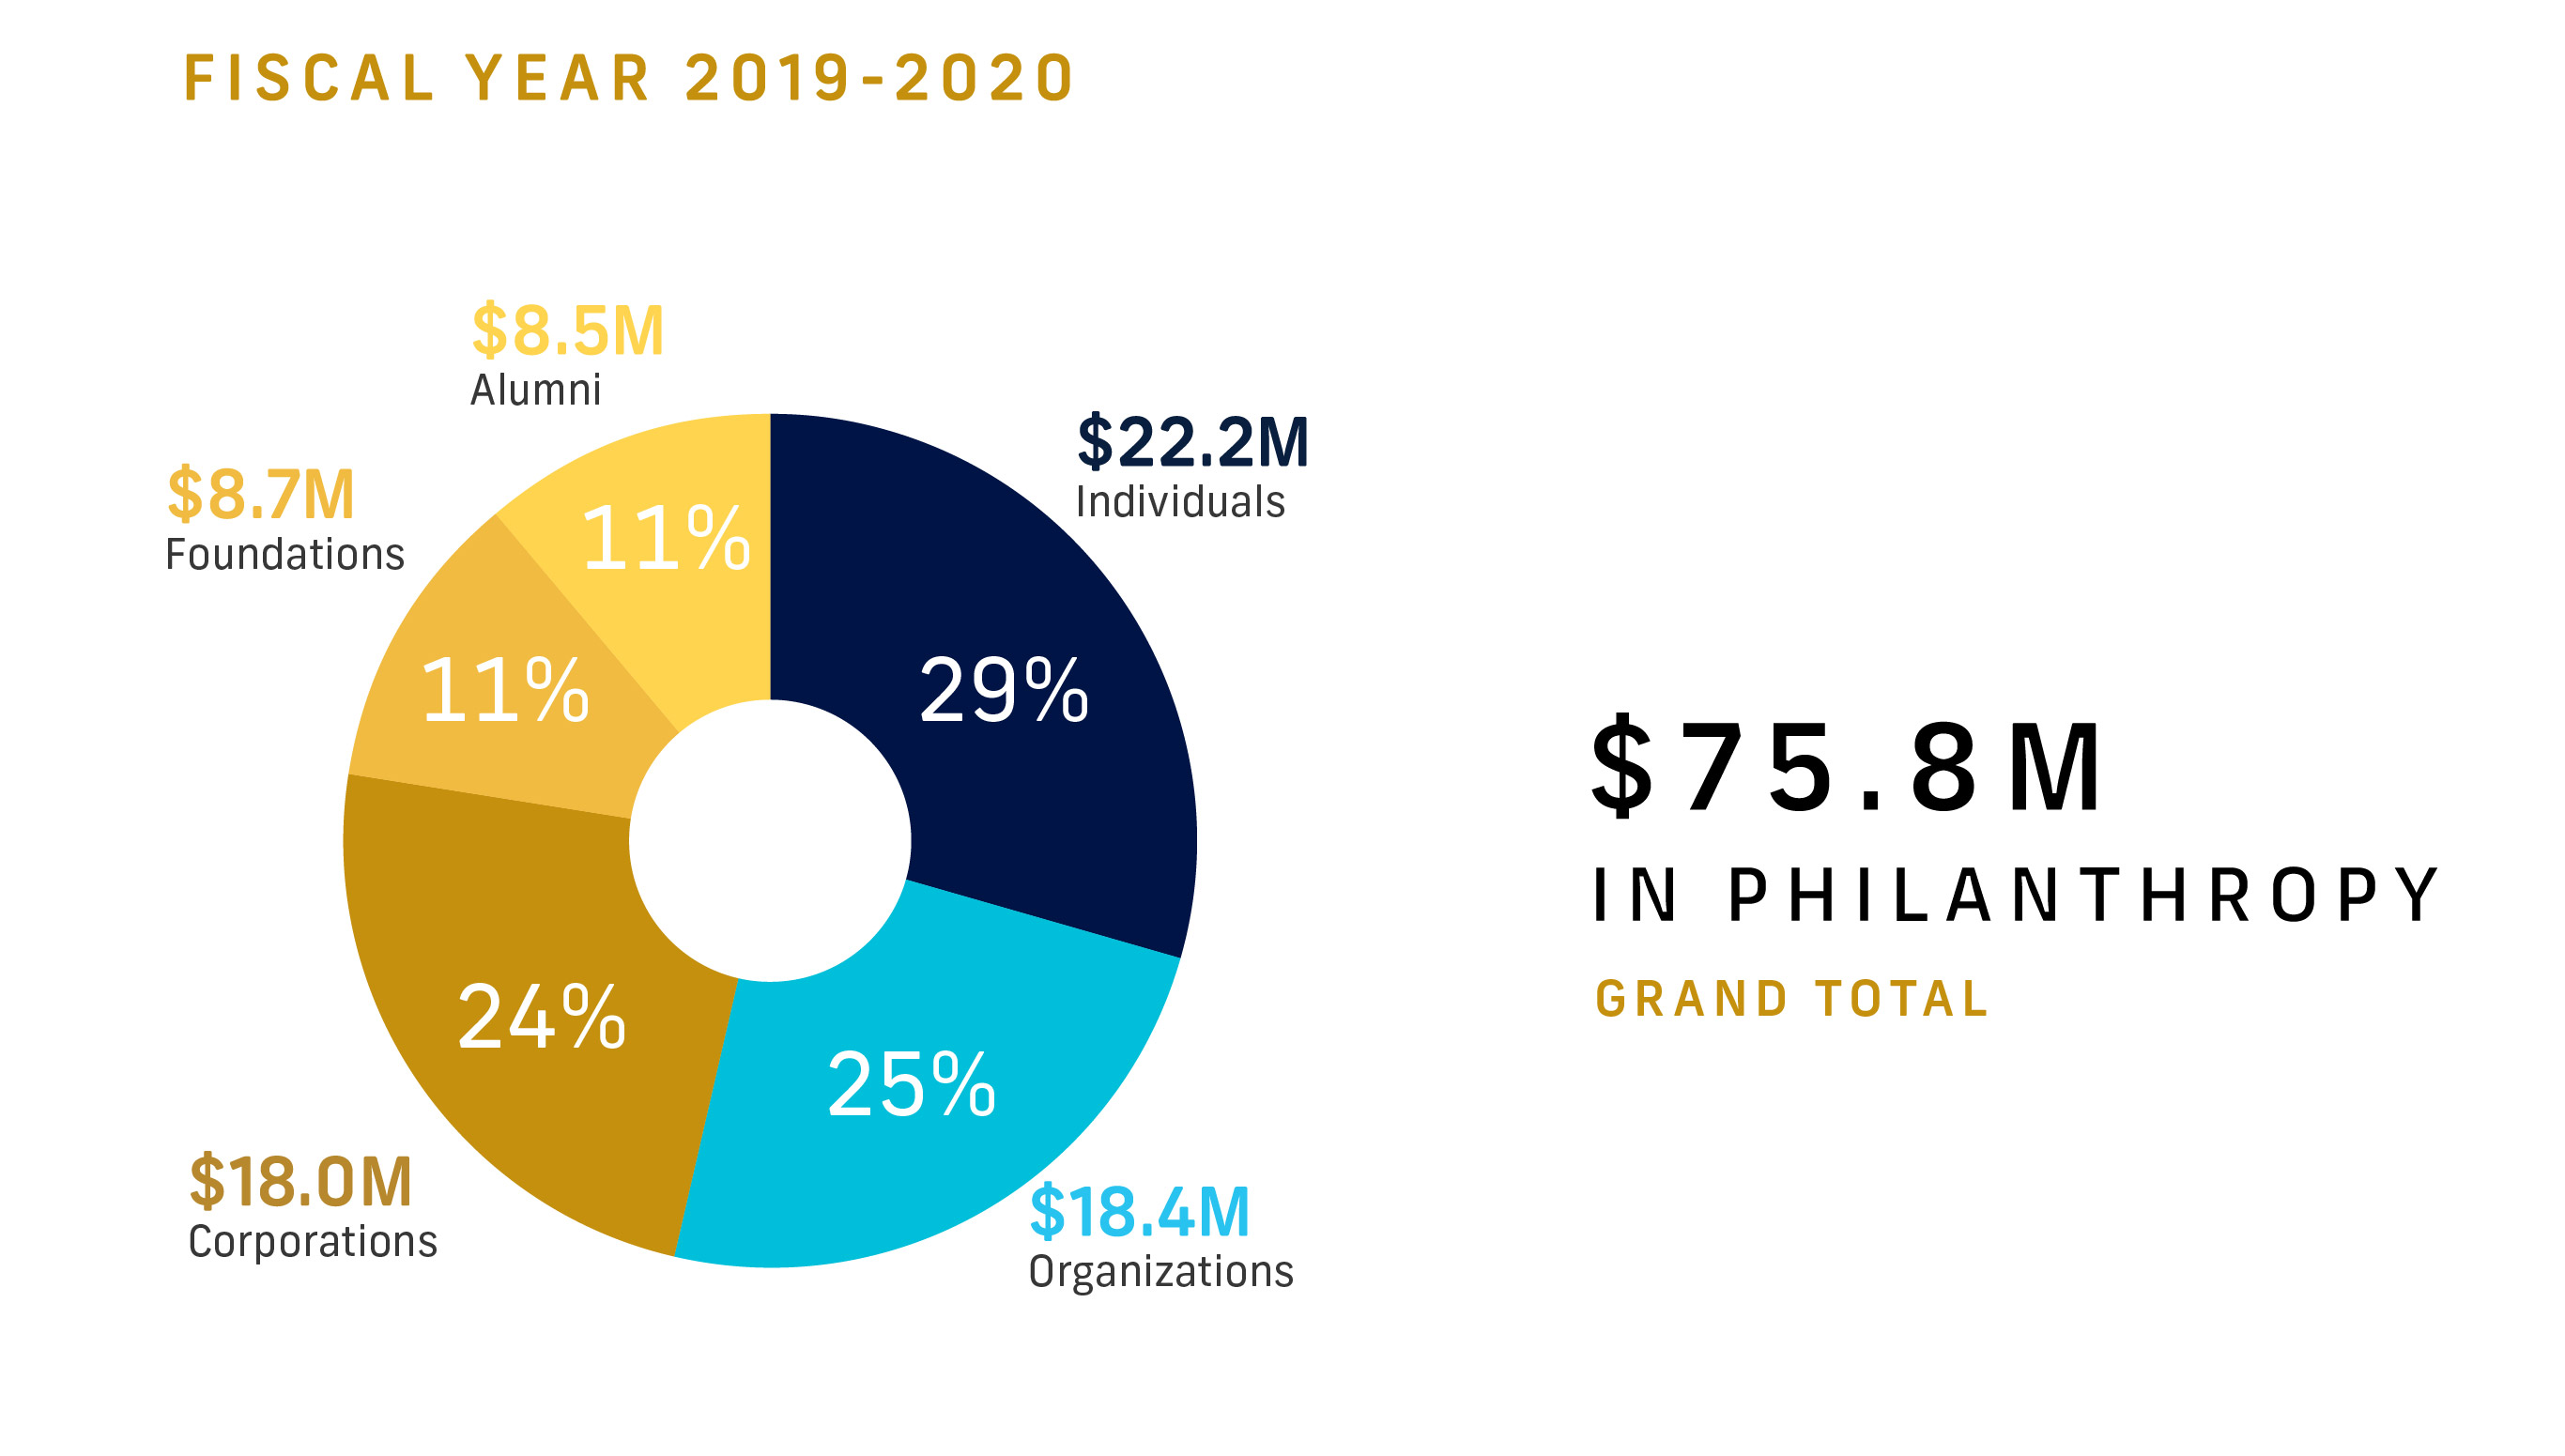 Fiscal Year 2019-2020, Grand Total $7.85M in Philanthropy